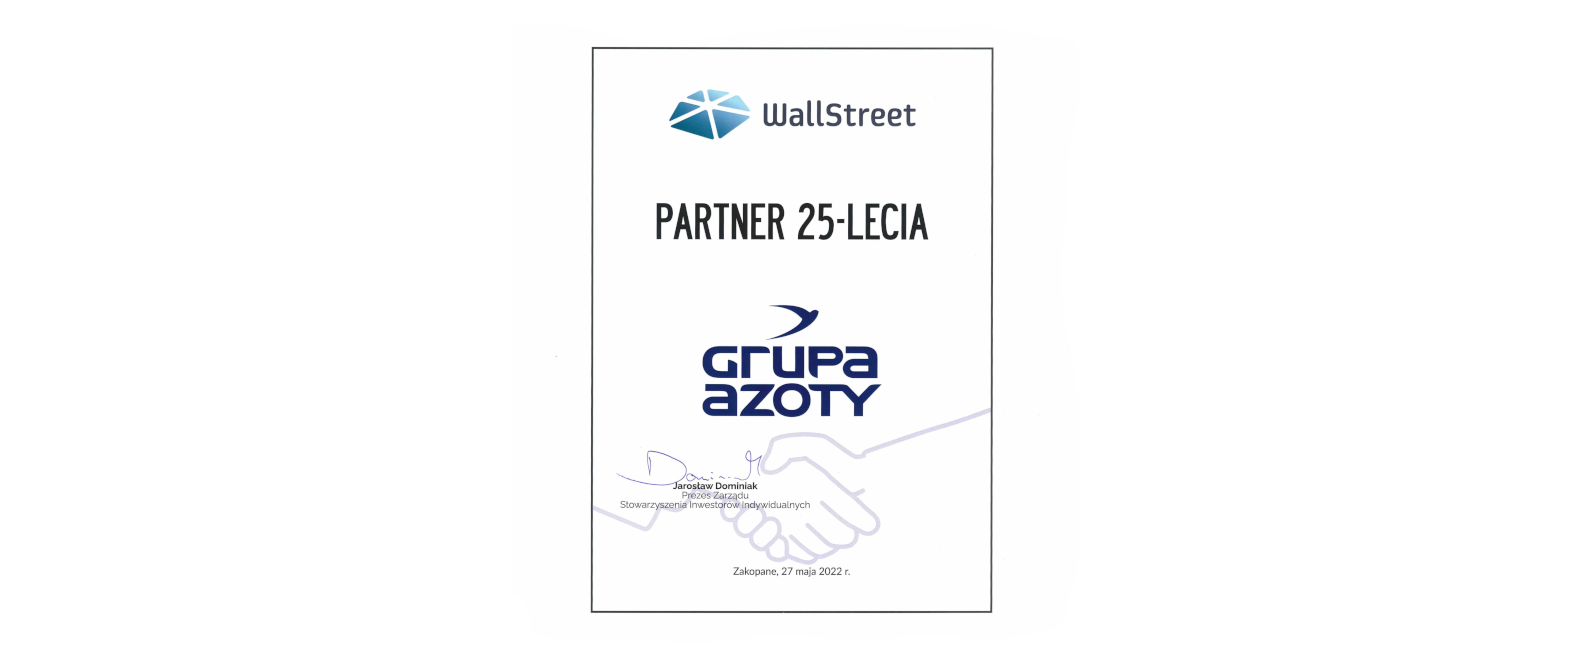 Grupa Azoty S.A. honored as a Partner of the 25th anniversary on the "WallStreet"